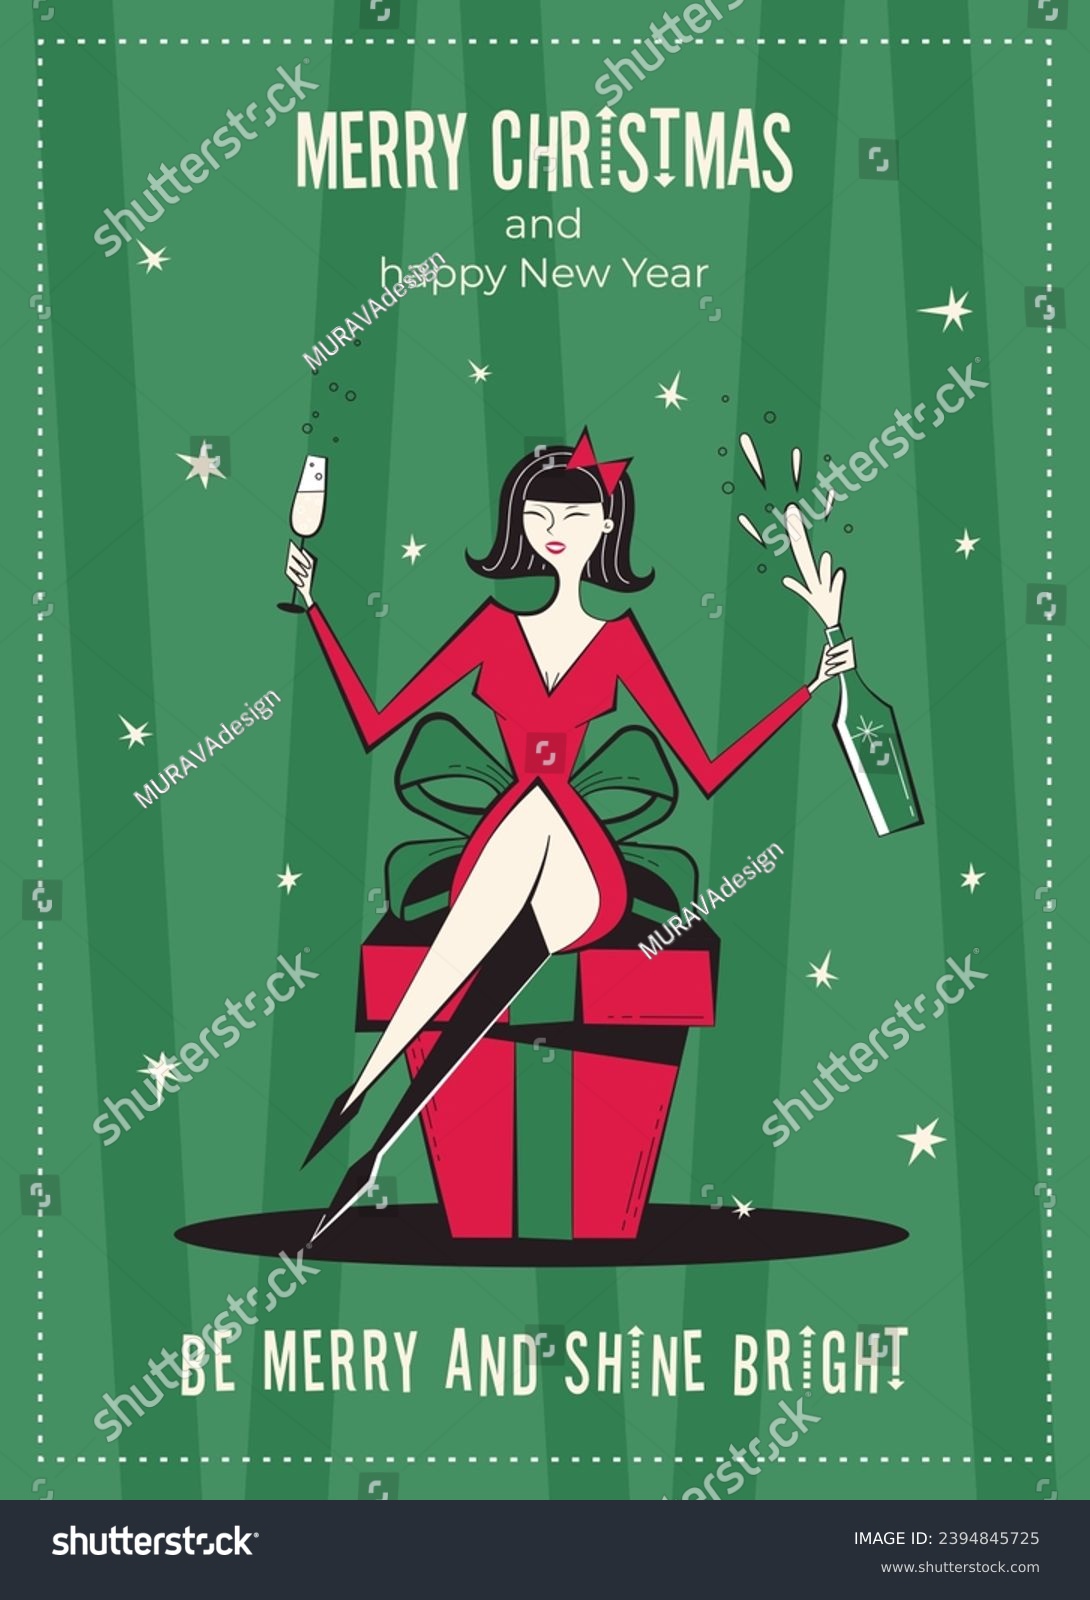 SVG of Merry Christmas and happy New Year greeting card, poster. 60s-70s retro style poster with Christmas wishes text. Woman characters in red dress, holding champagne bottle and glass, sitting on gift box. svg